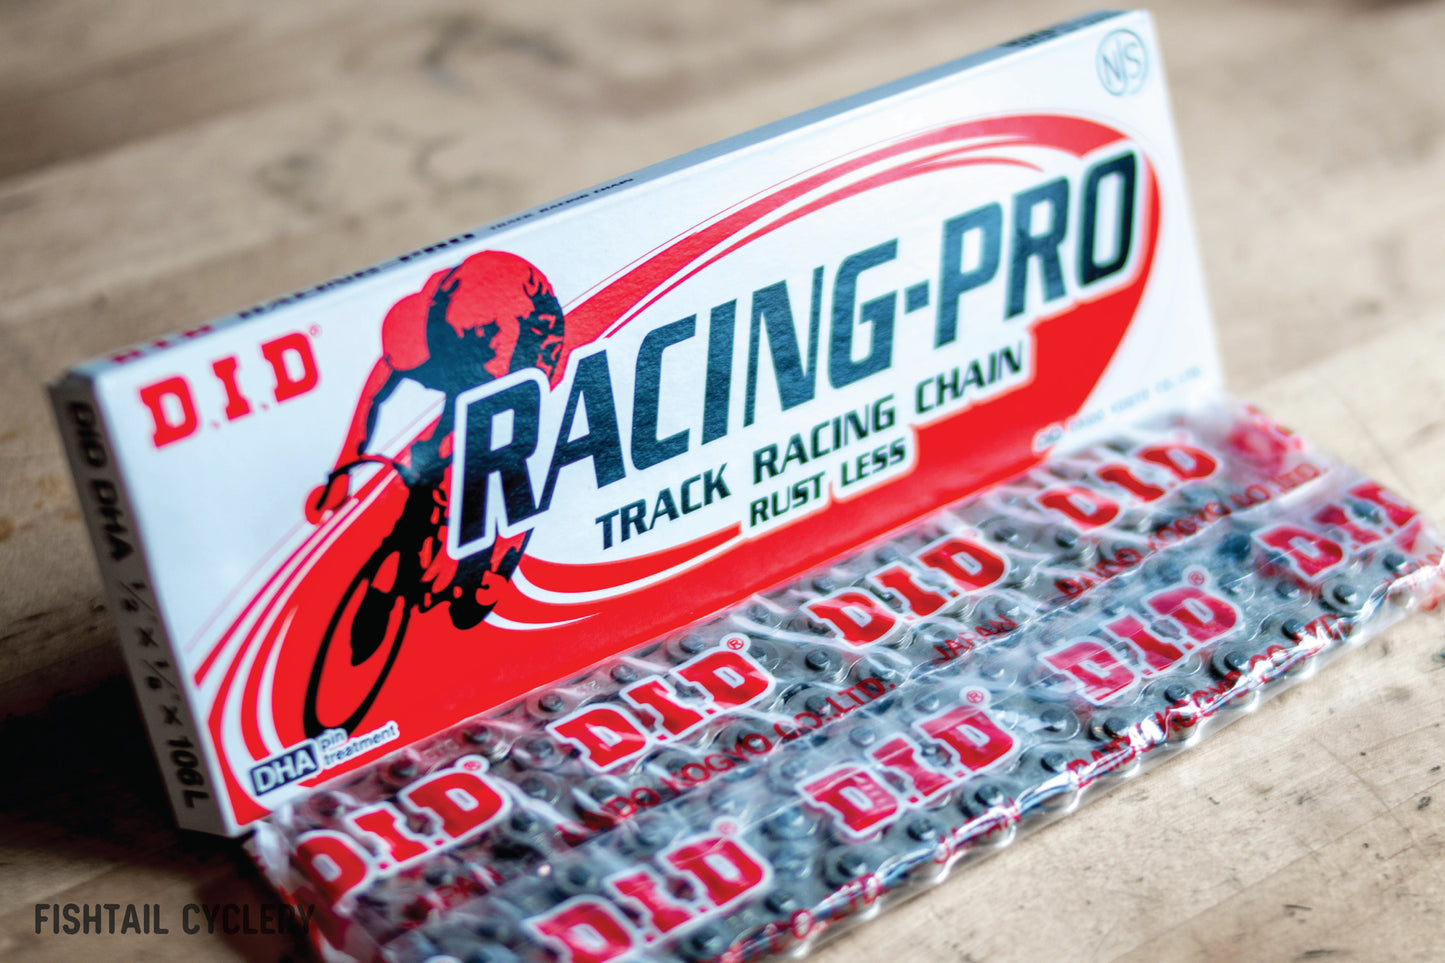 DAIDO (D.I.D) RACING PRO TRACK RACING CHAIN [NJS] - FISHTAIL CYCLERY